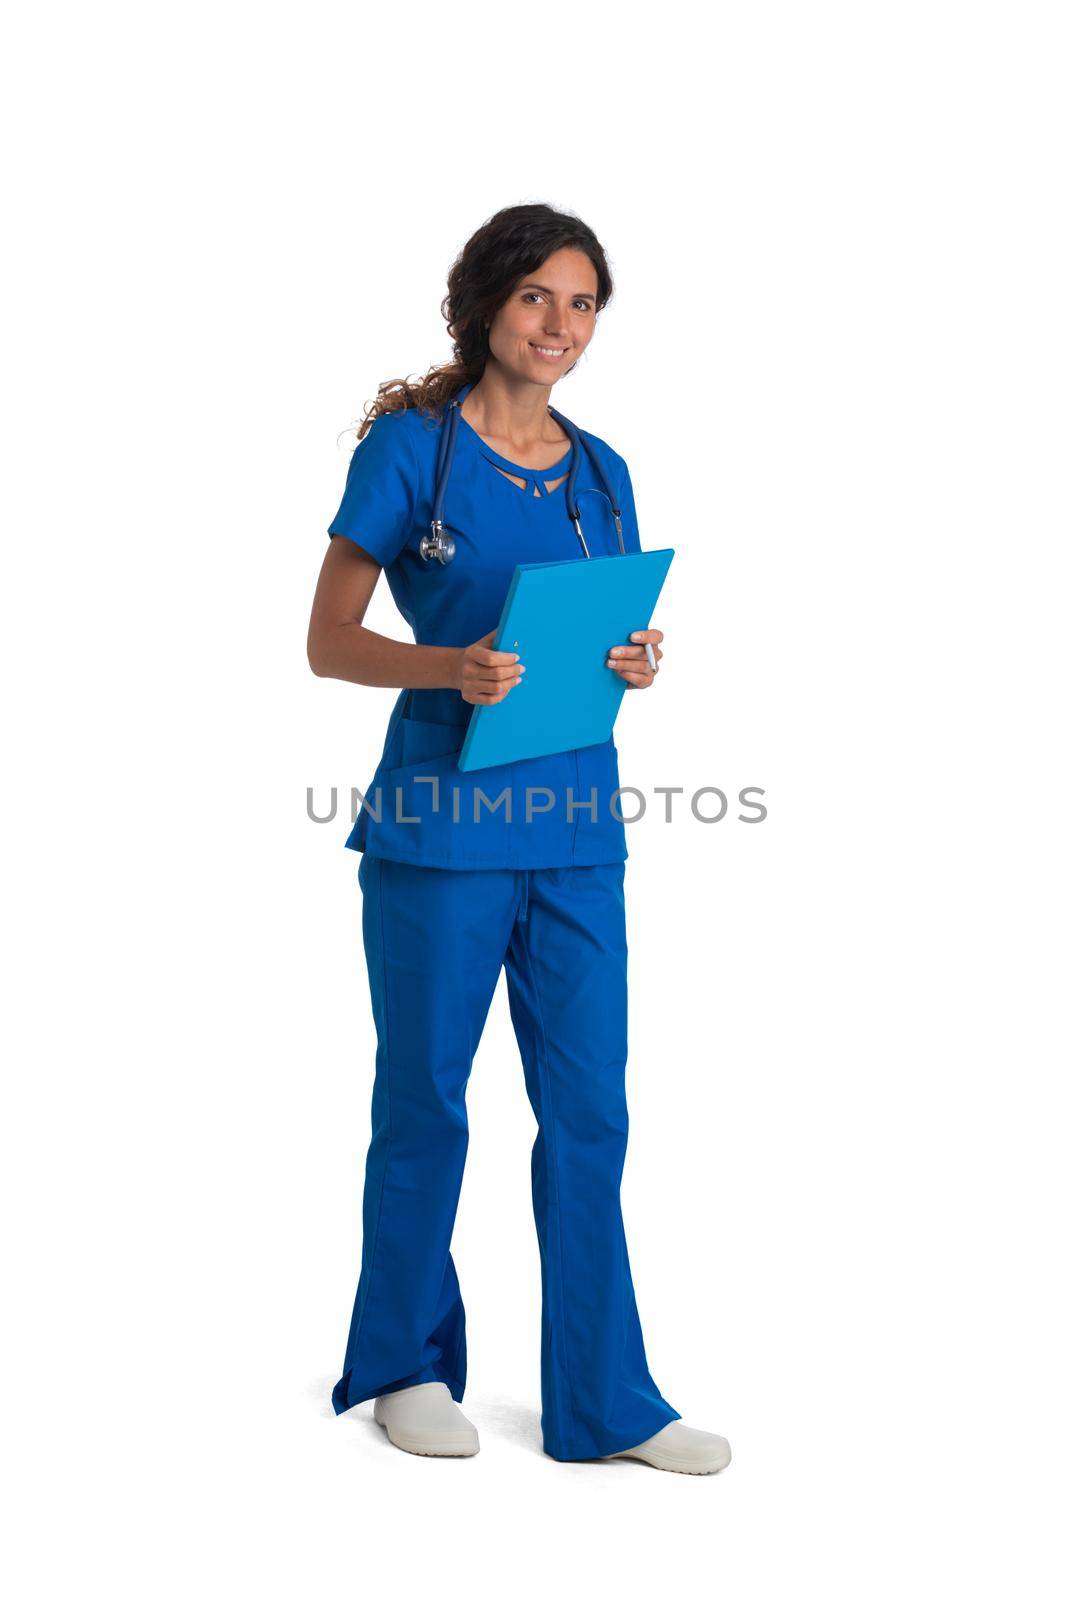 Young female doctor with stethoscope and document folder, full length portrait isolated on white background